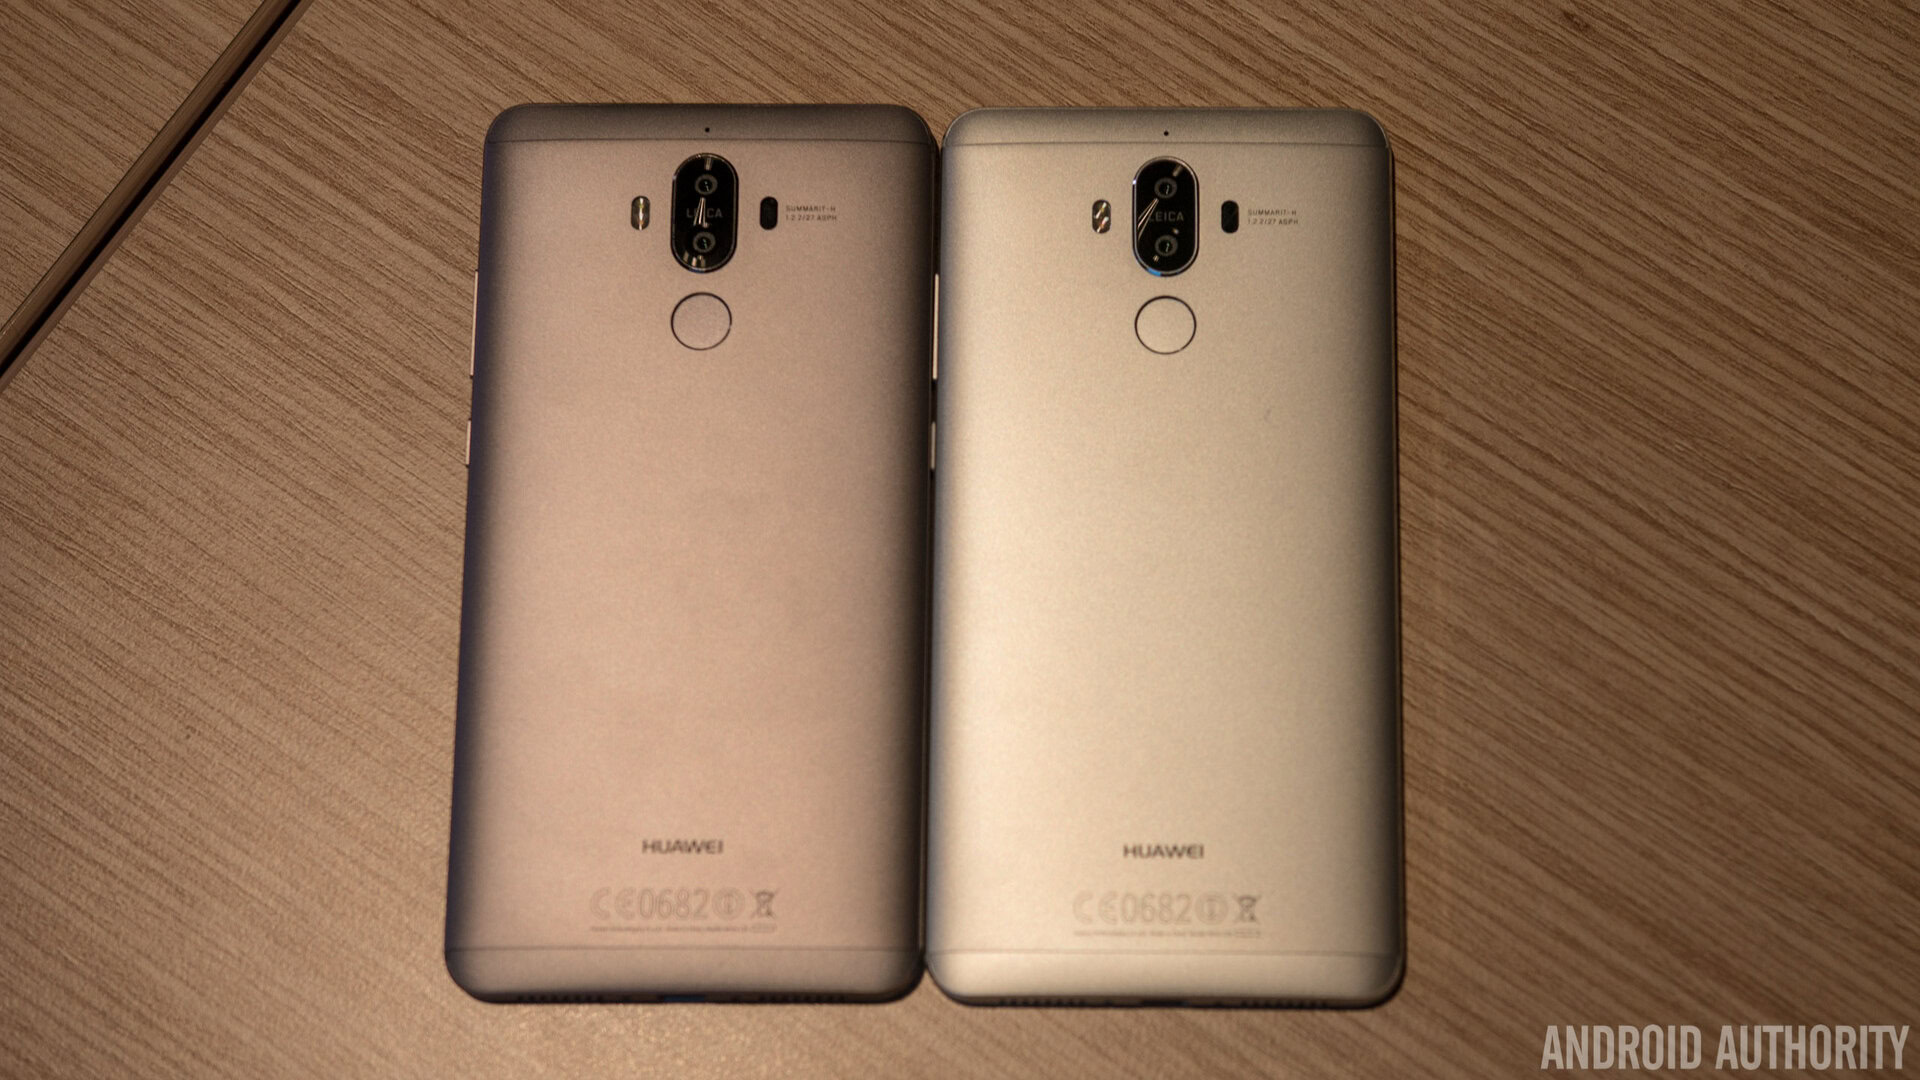 regering Peer Nutteloos HUAWEI Mate 9 specs, price, release date and everything else you should know